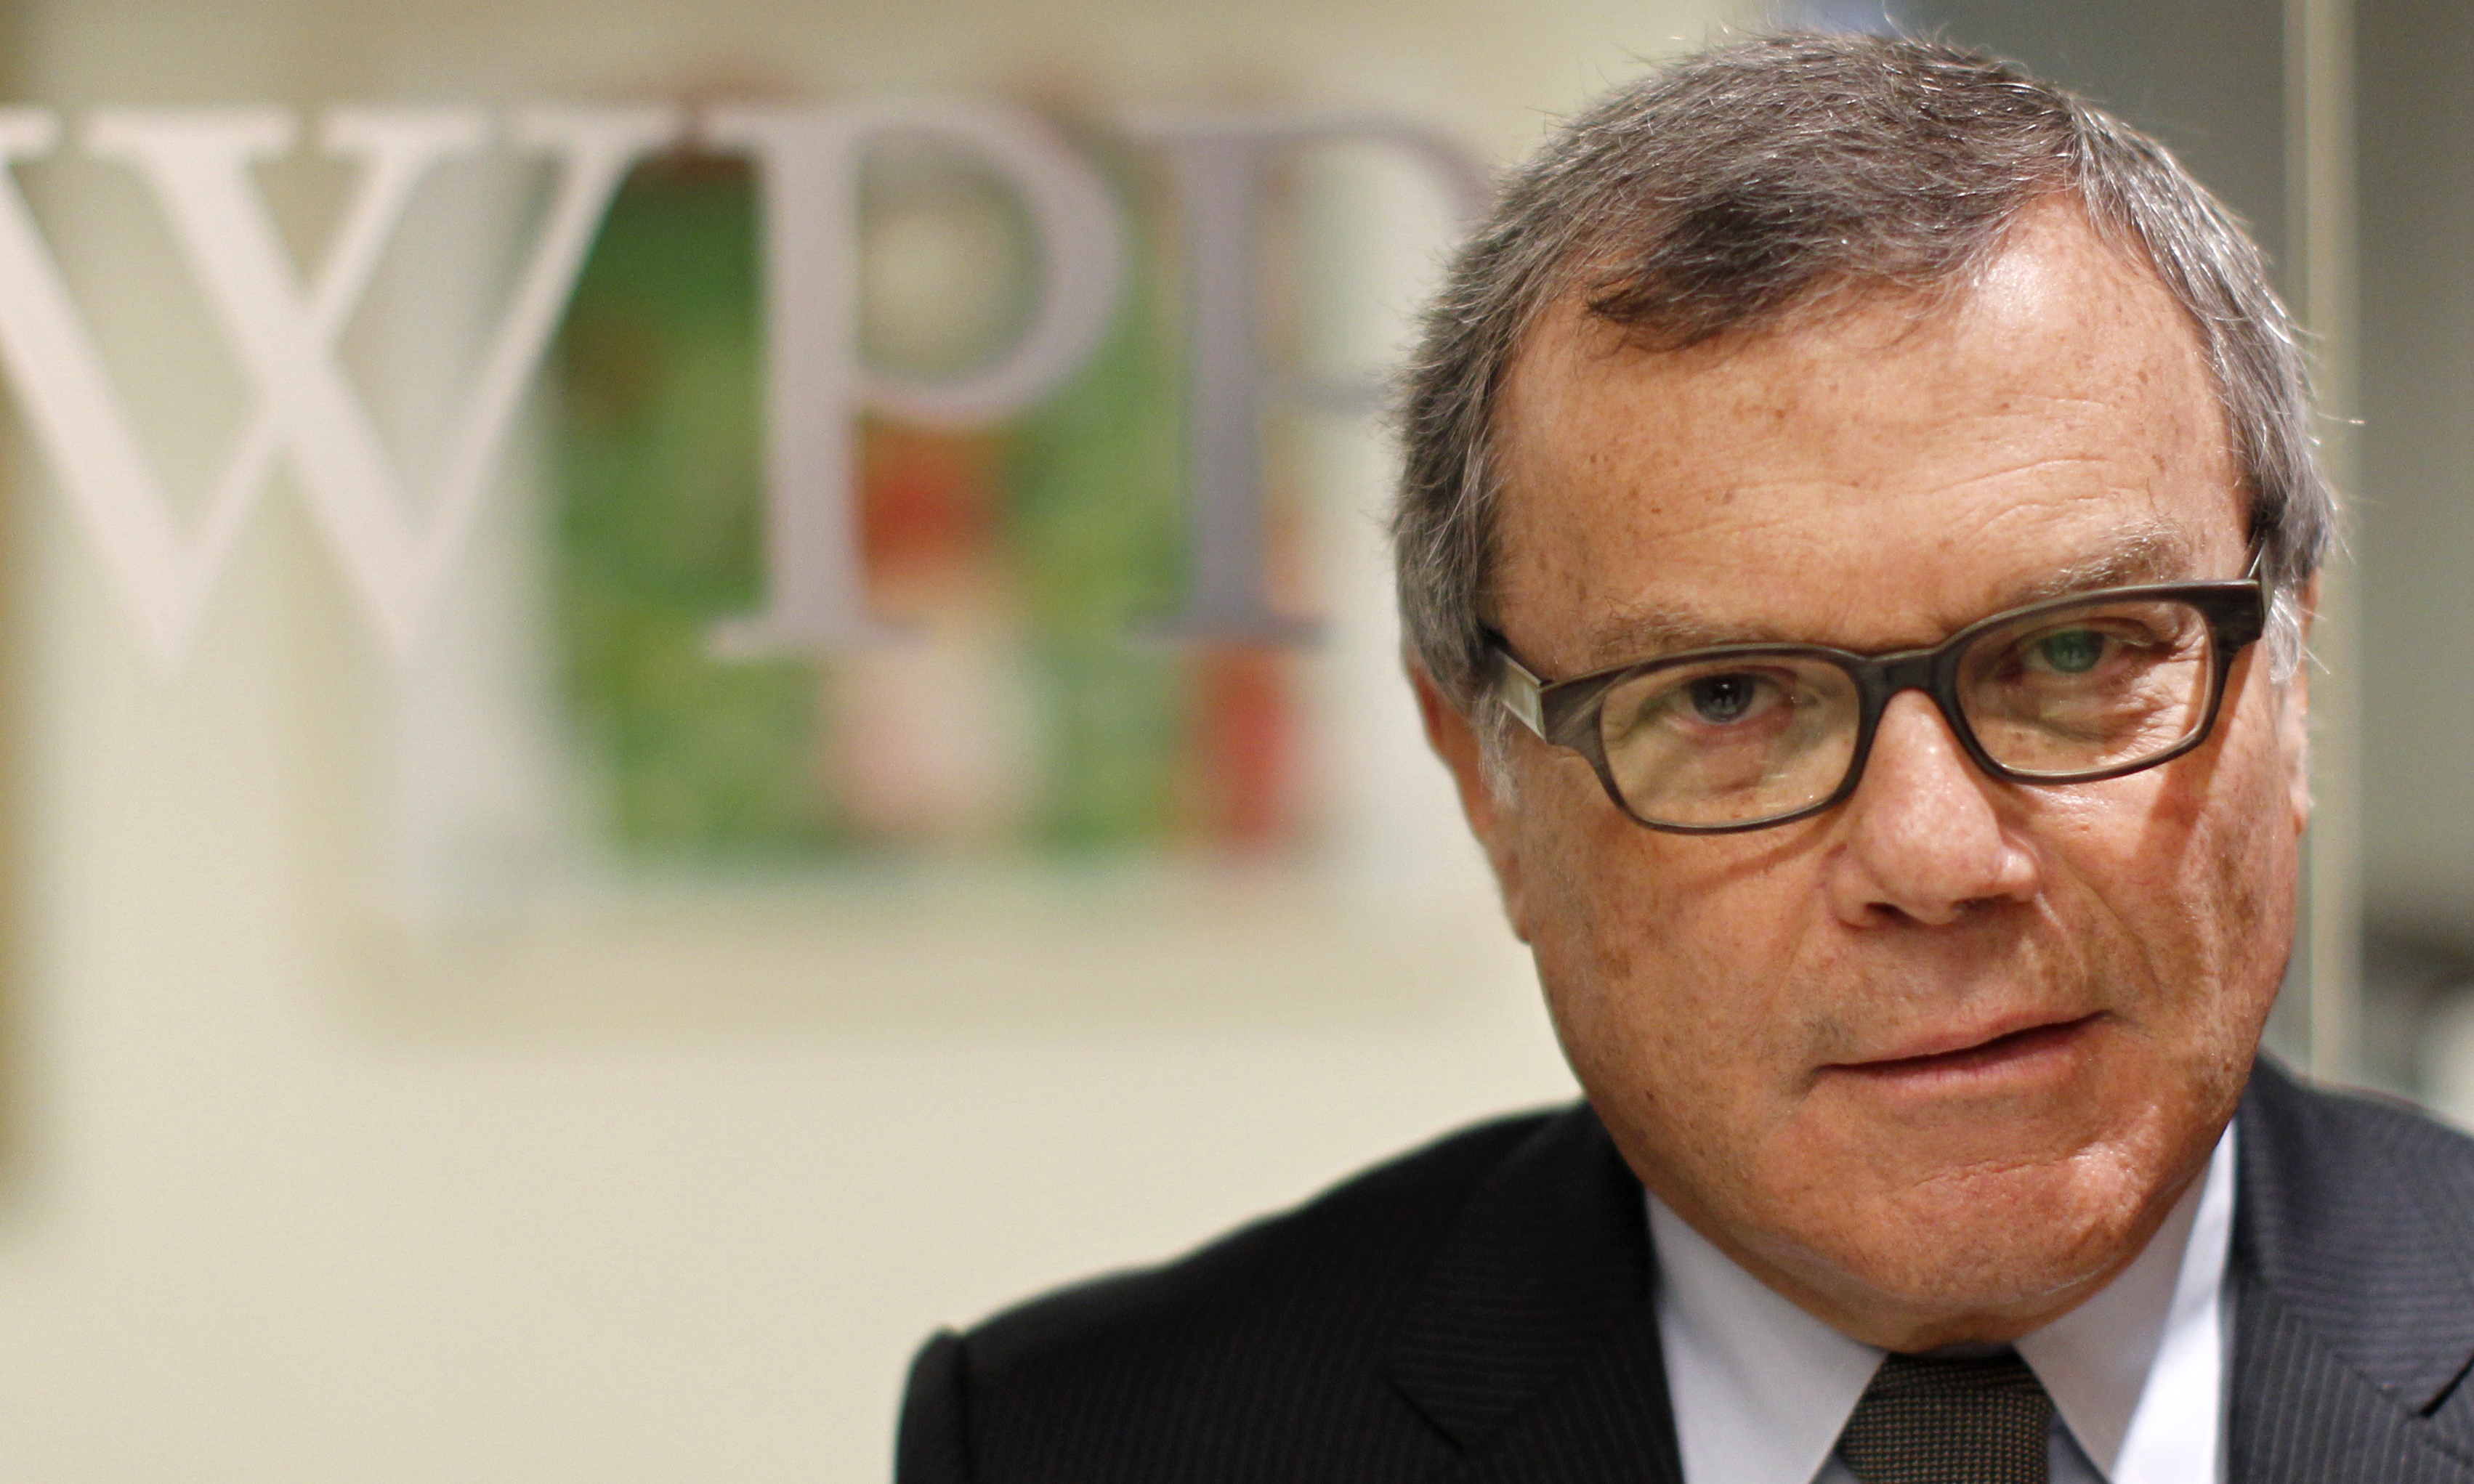 Martin Sorrell, chief executive officer of WPP group, poses outside the company's offices as part of the Reuters Global Media Summit in New York November 28, 2011. Sorrell, head of the world's largest advertising company, warned on Monday that the debt crisis gripping the euro zone was merely a sideshow to the United States which will face its own funding crunch in 2013. REUTERS/Brendan McDermid (UNITED STATES - Tags: MEDIA BUSINESS PORTRAIT HEADSHOT) - RTR2ULAR